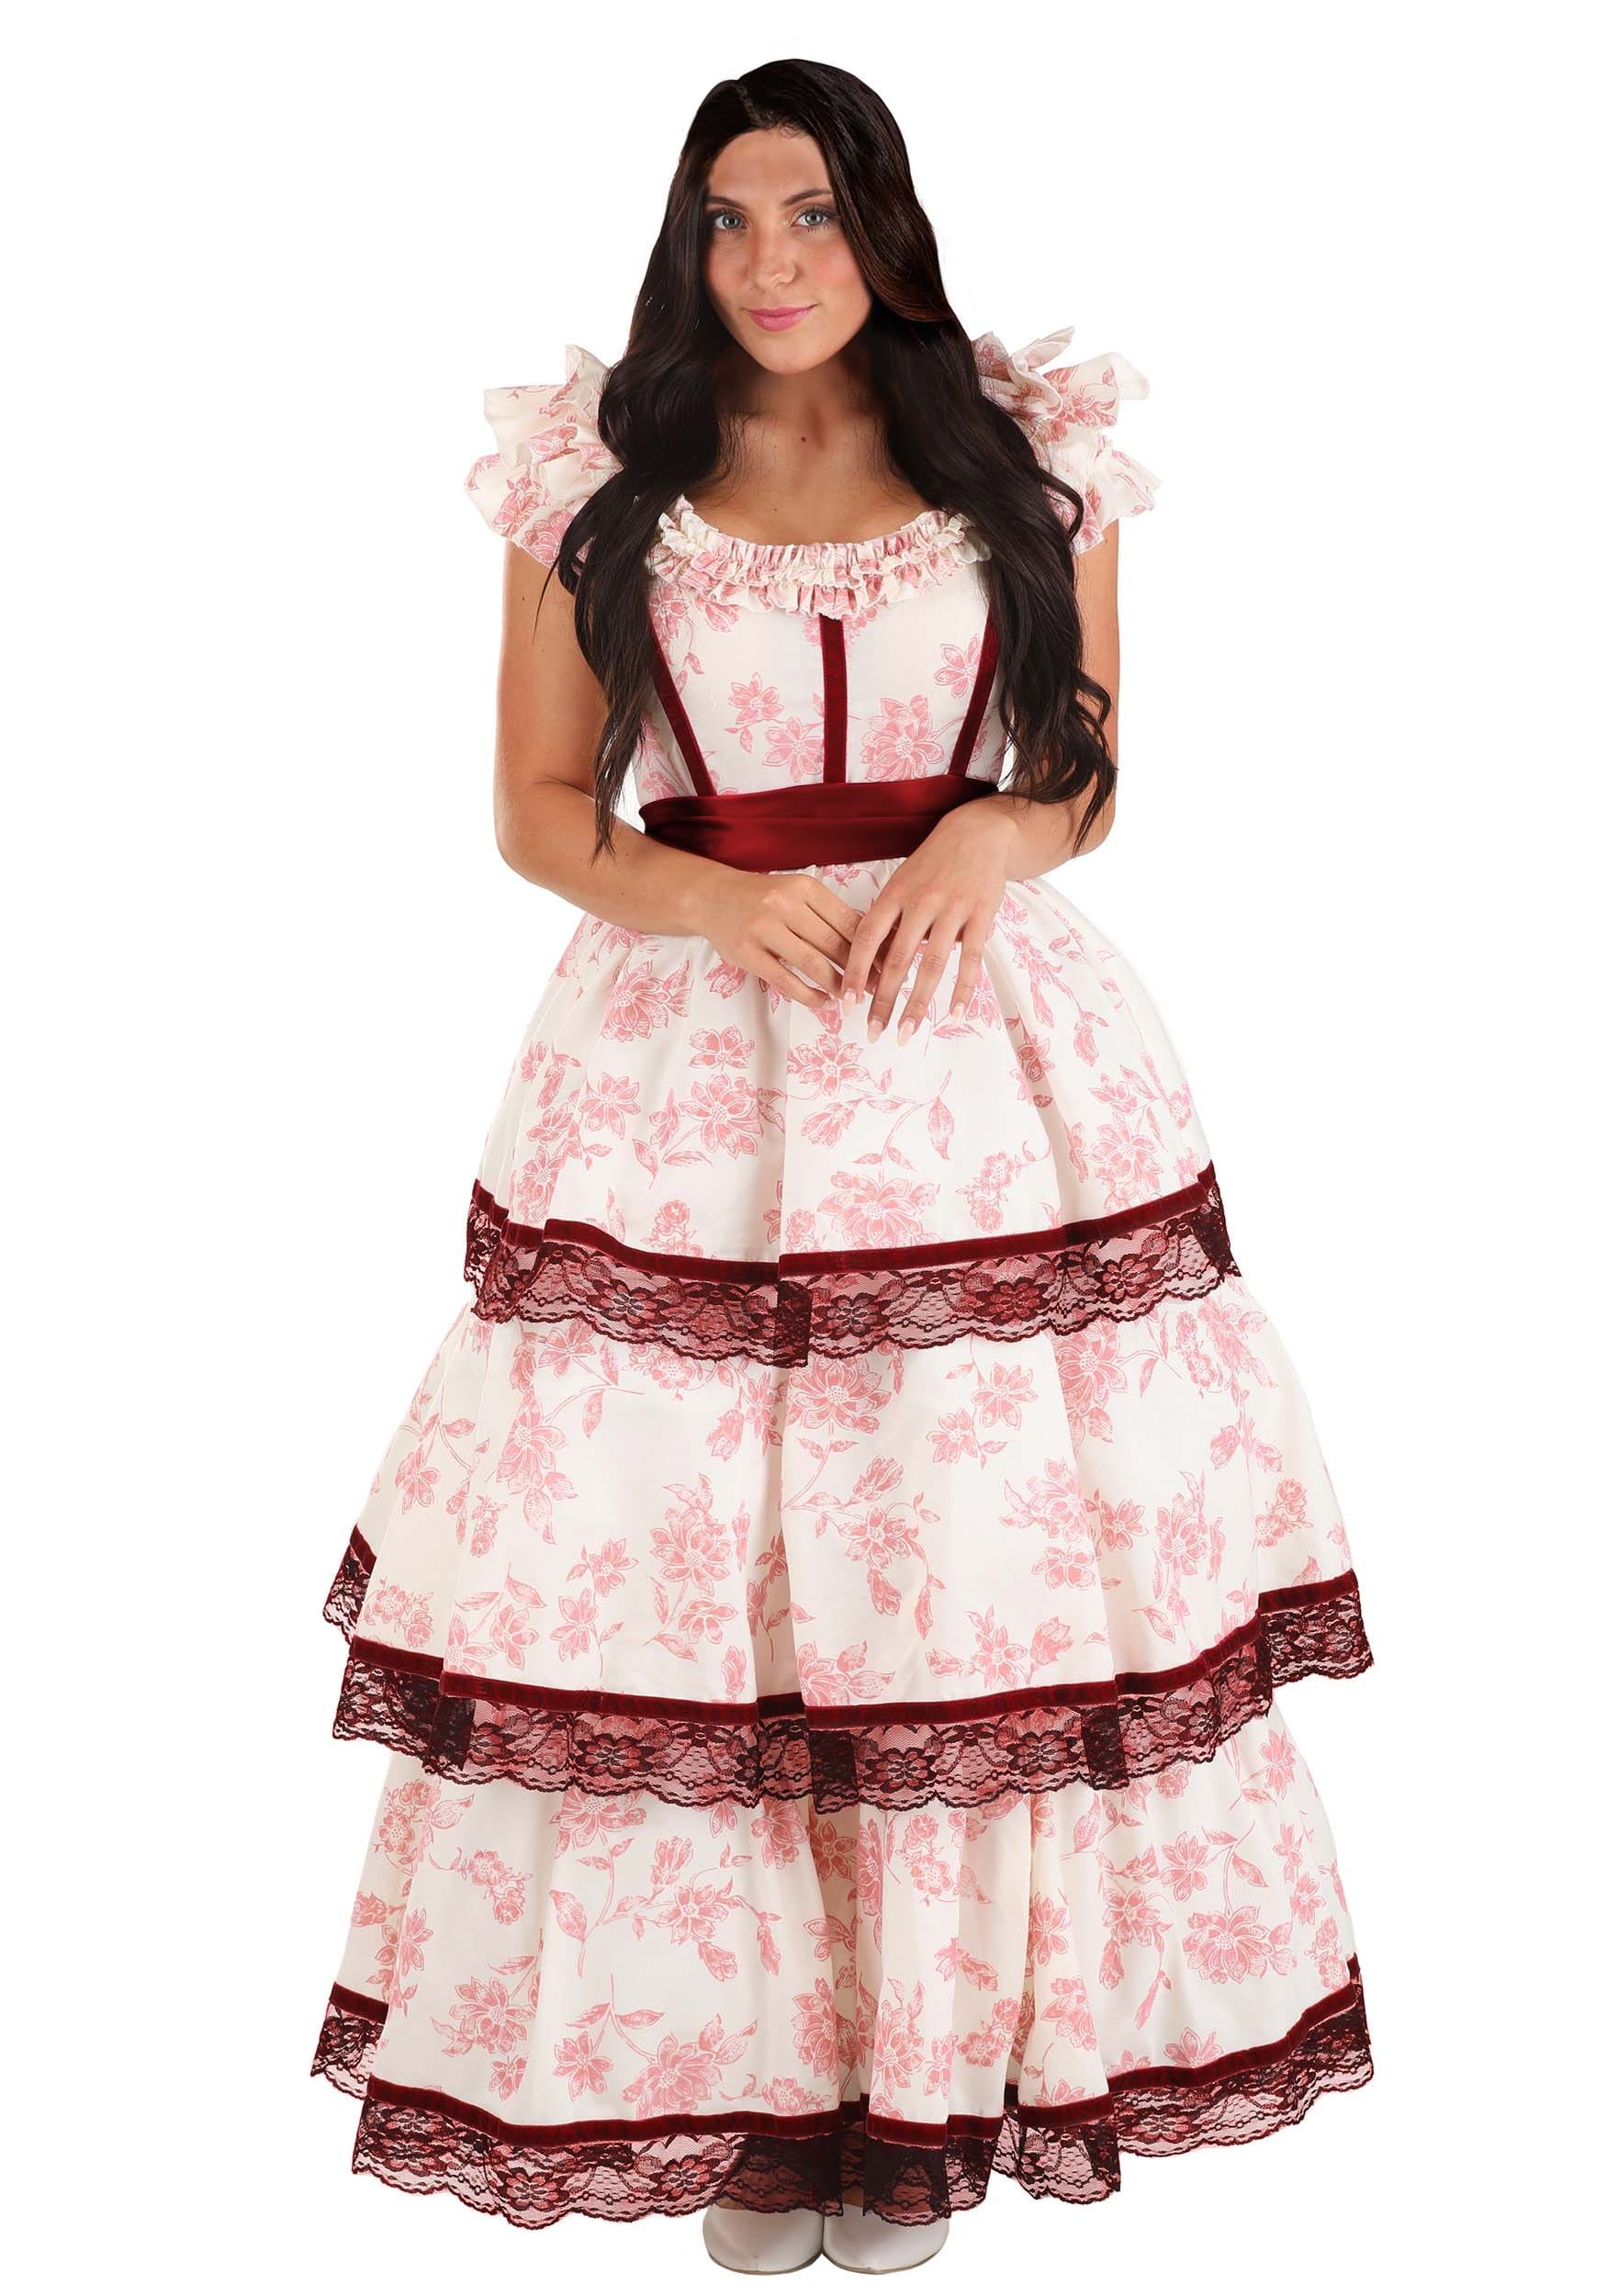 Southern Belle Dresses, Southern Belle Costumes & Patterns Southern Belle Womens Costume $54.99 AT vintagedancer.com